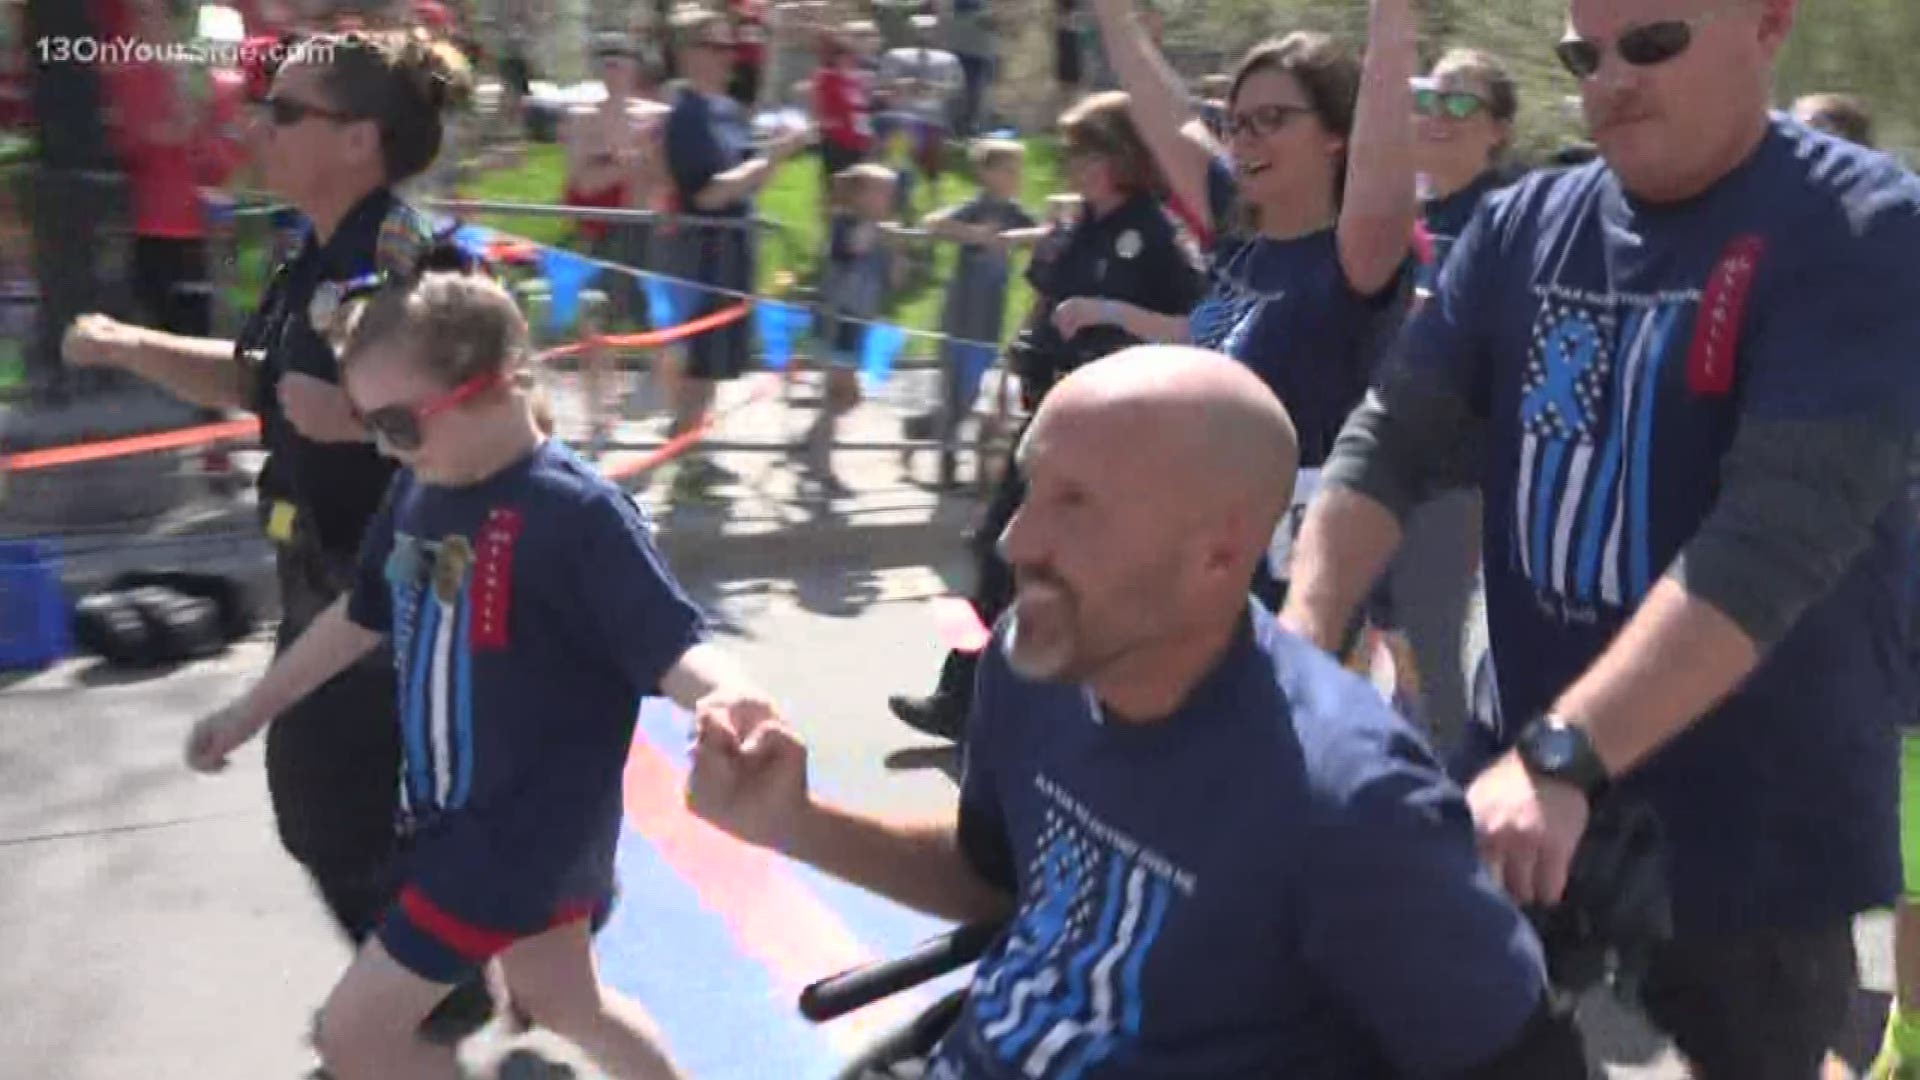 Kennedy Arney had a special bond with the GRPD 2016 Officer of the Year, who died from ALS.